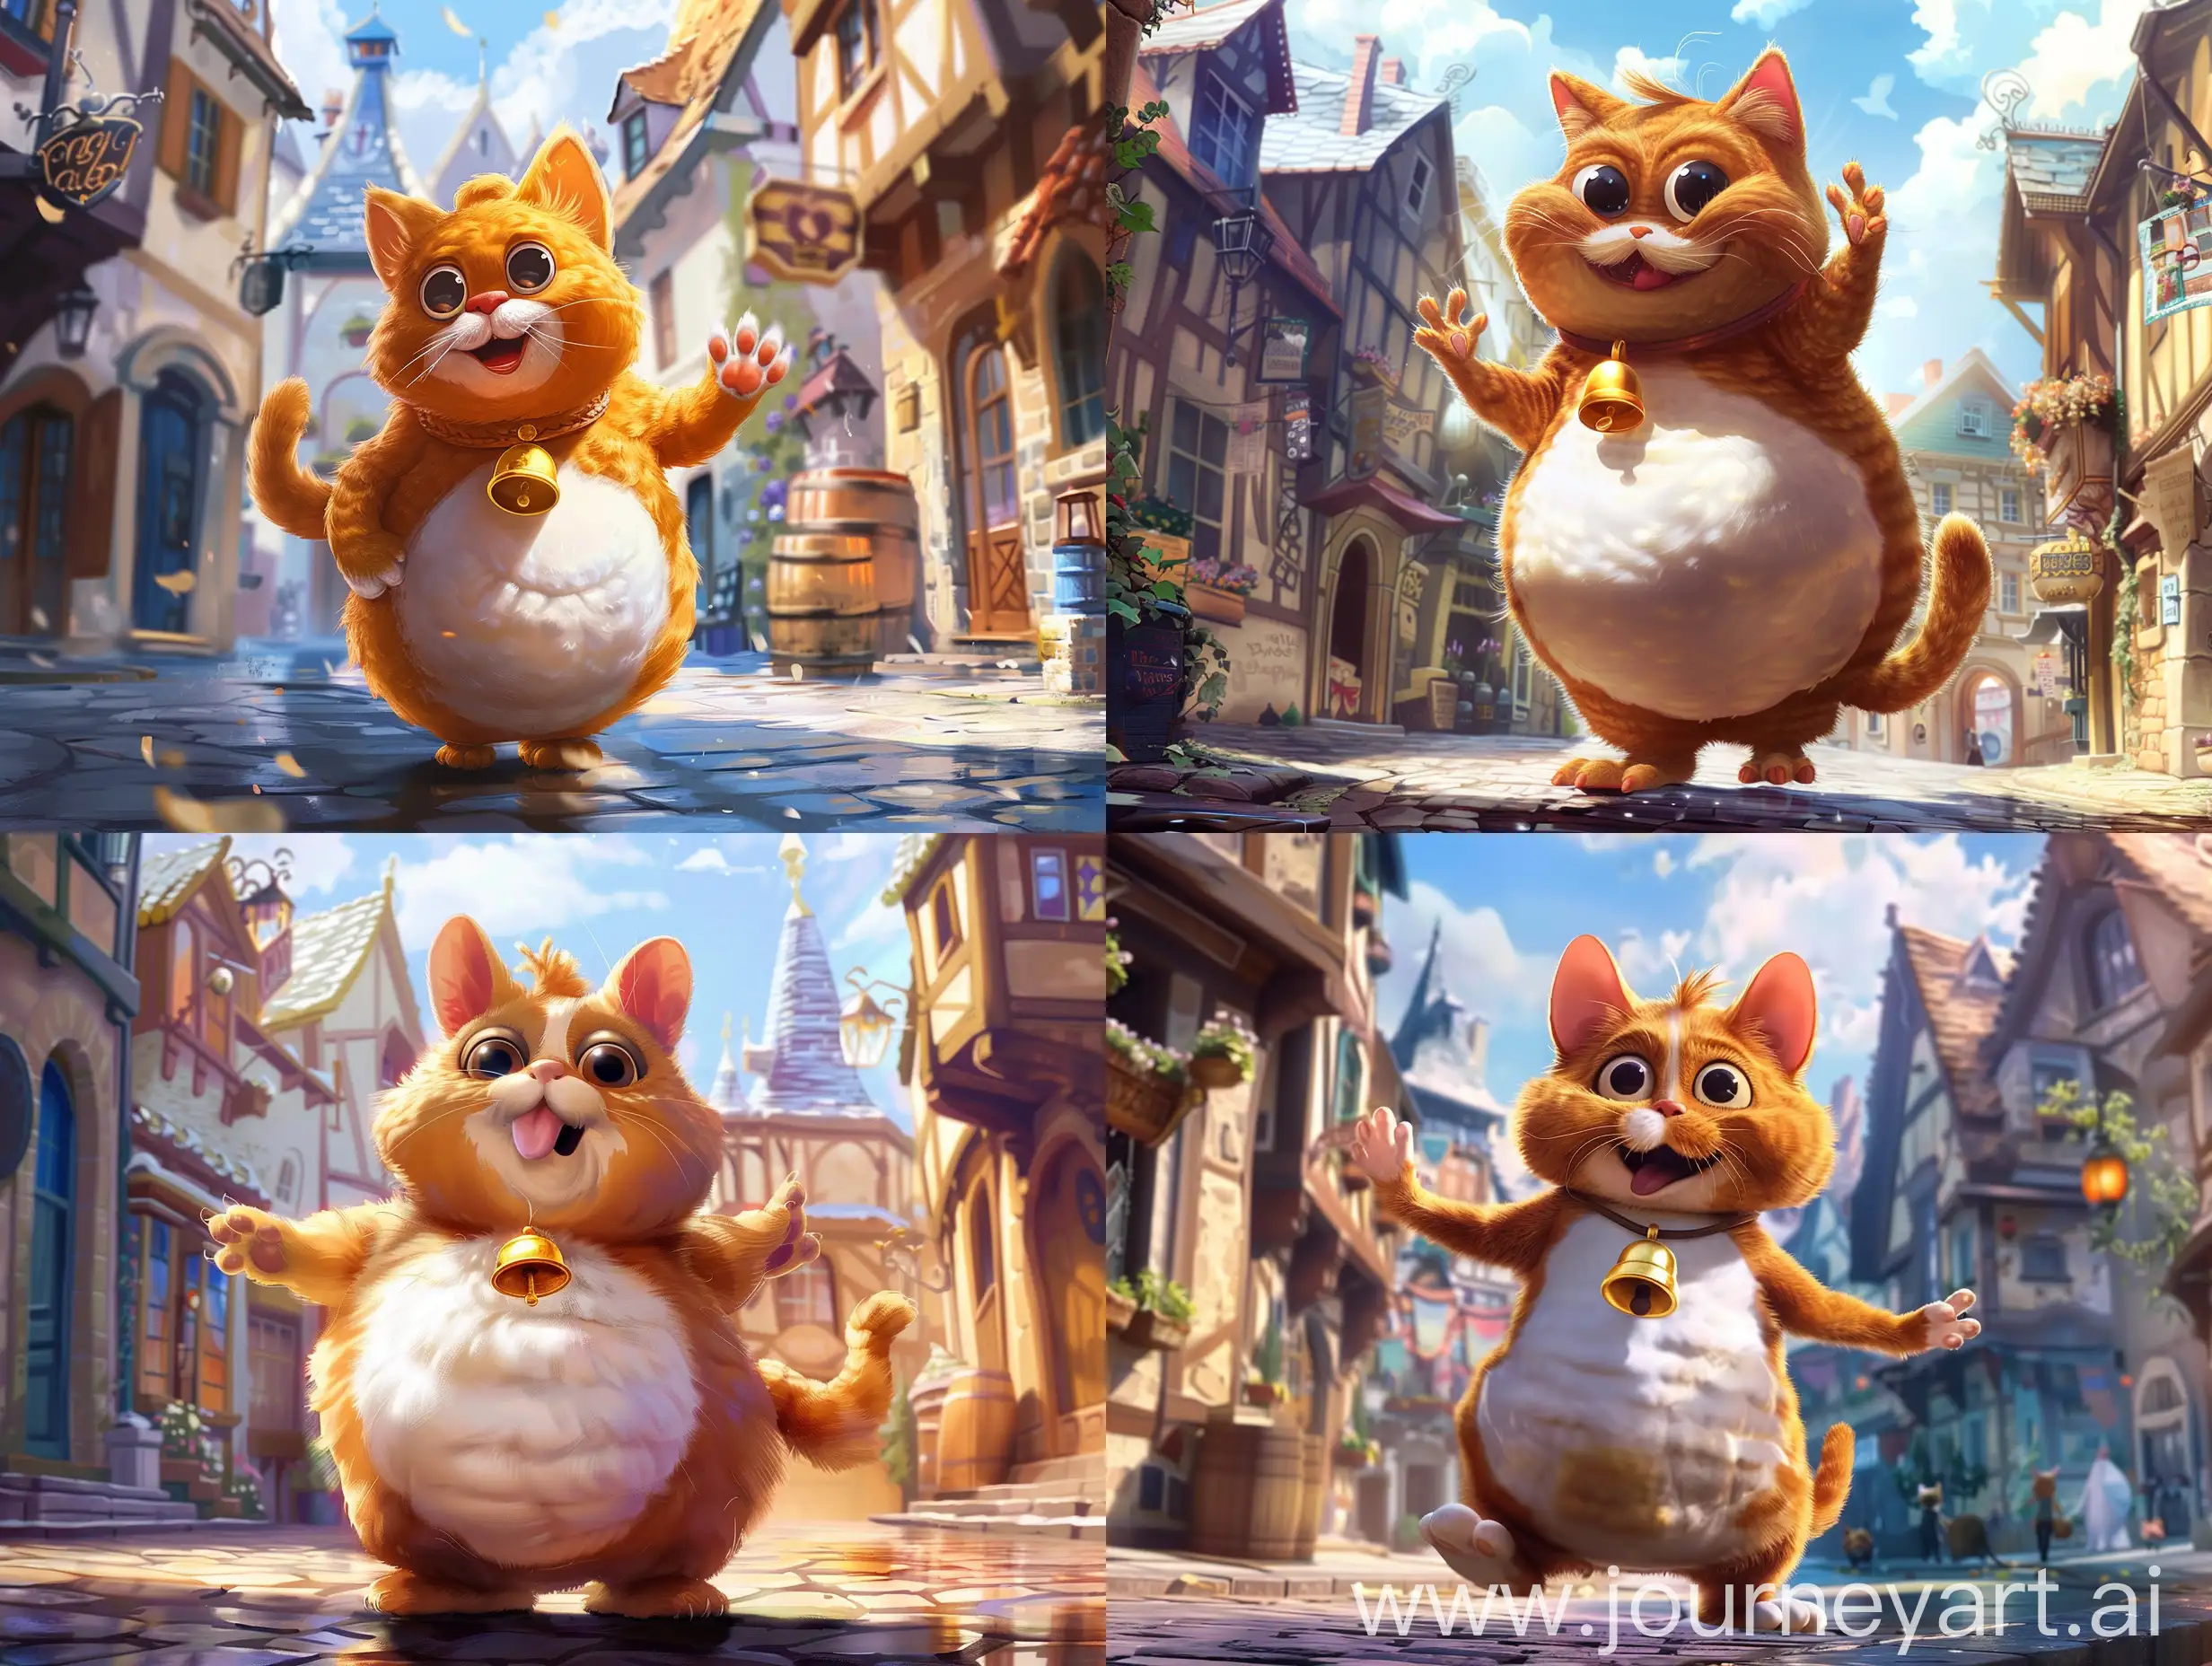 masterpiece, 4k HD wallpaper, best quality, high resolution, one small fatty and cutie Garfield cats, white stomach part with a golden bell on its chest, walking on a fairy tale street. waving their mouths, big black eyes, anime background